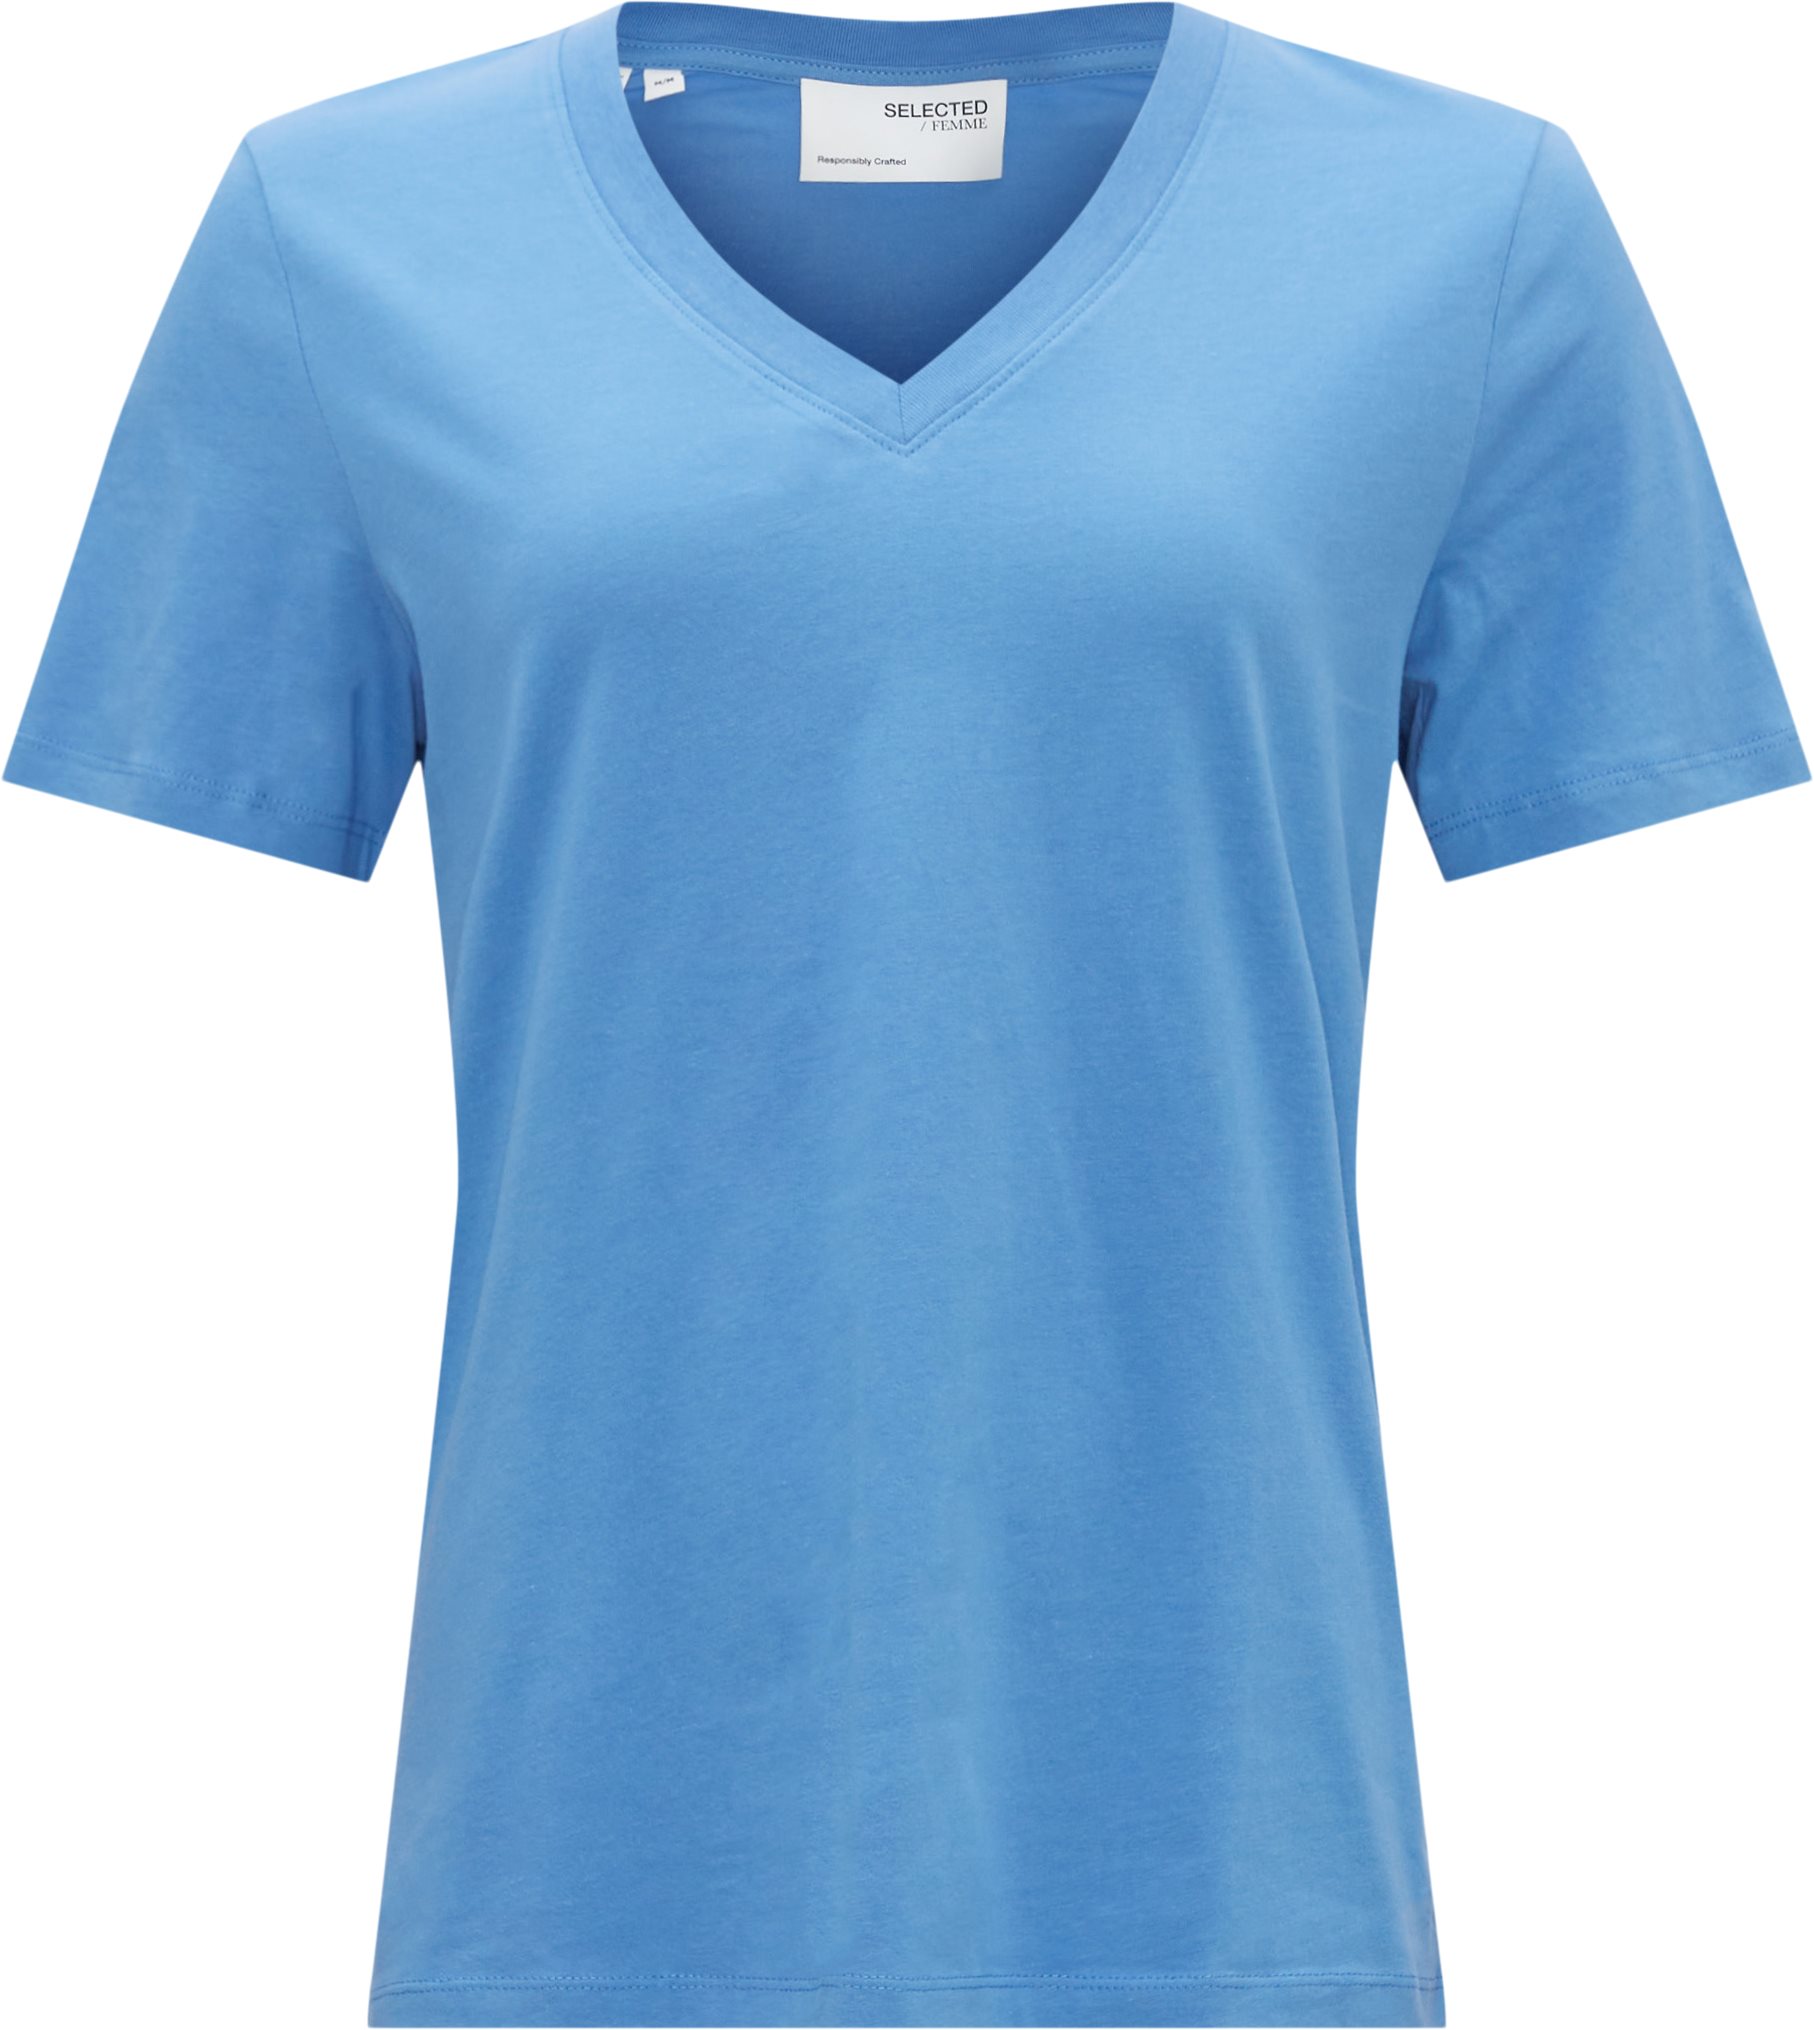 V-NECK Femme MARINE from ESSENTIAL T-shirts EUR SS Seleted TEE 16087922 22